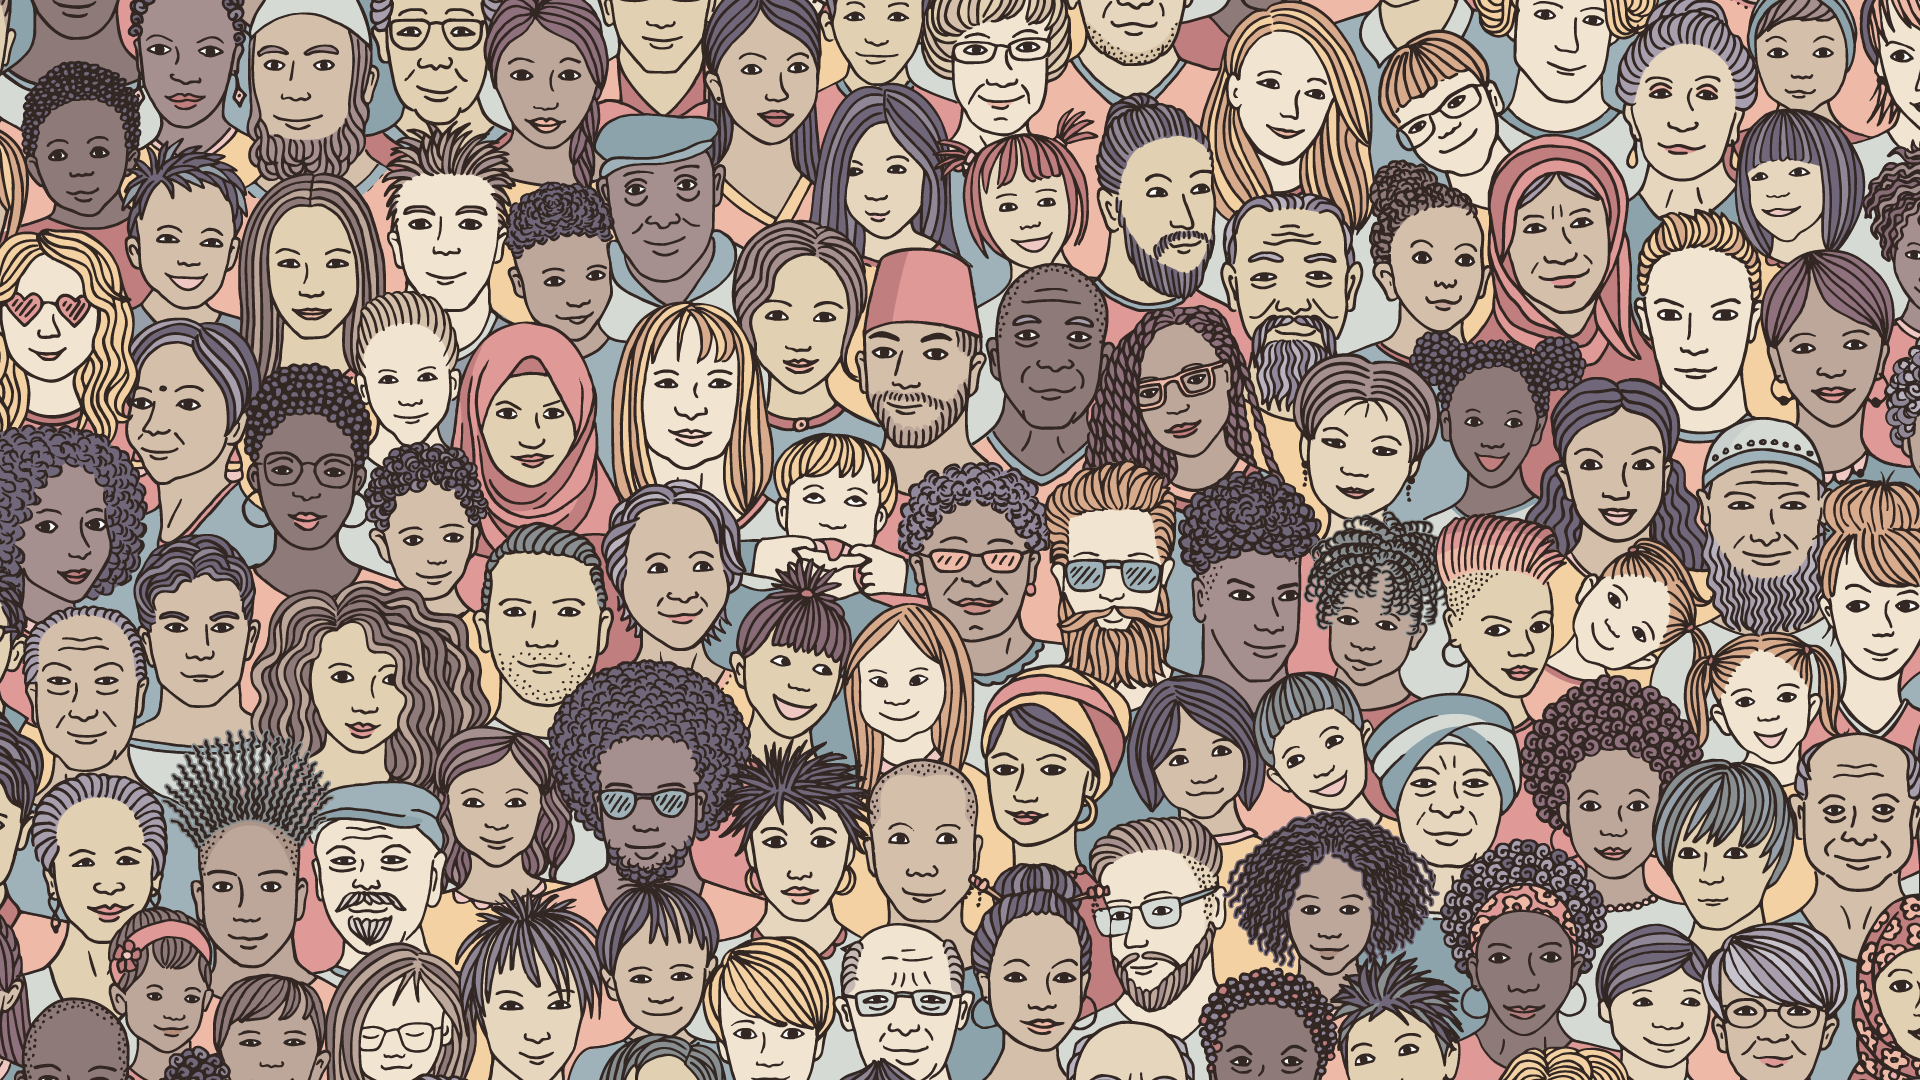 Illustration of a crowd of diverse faces